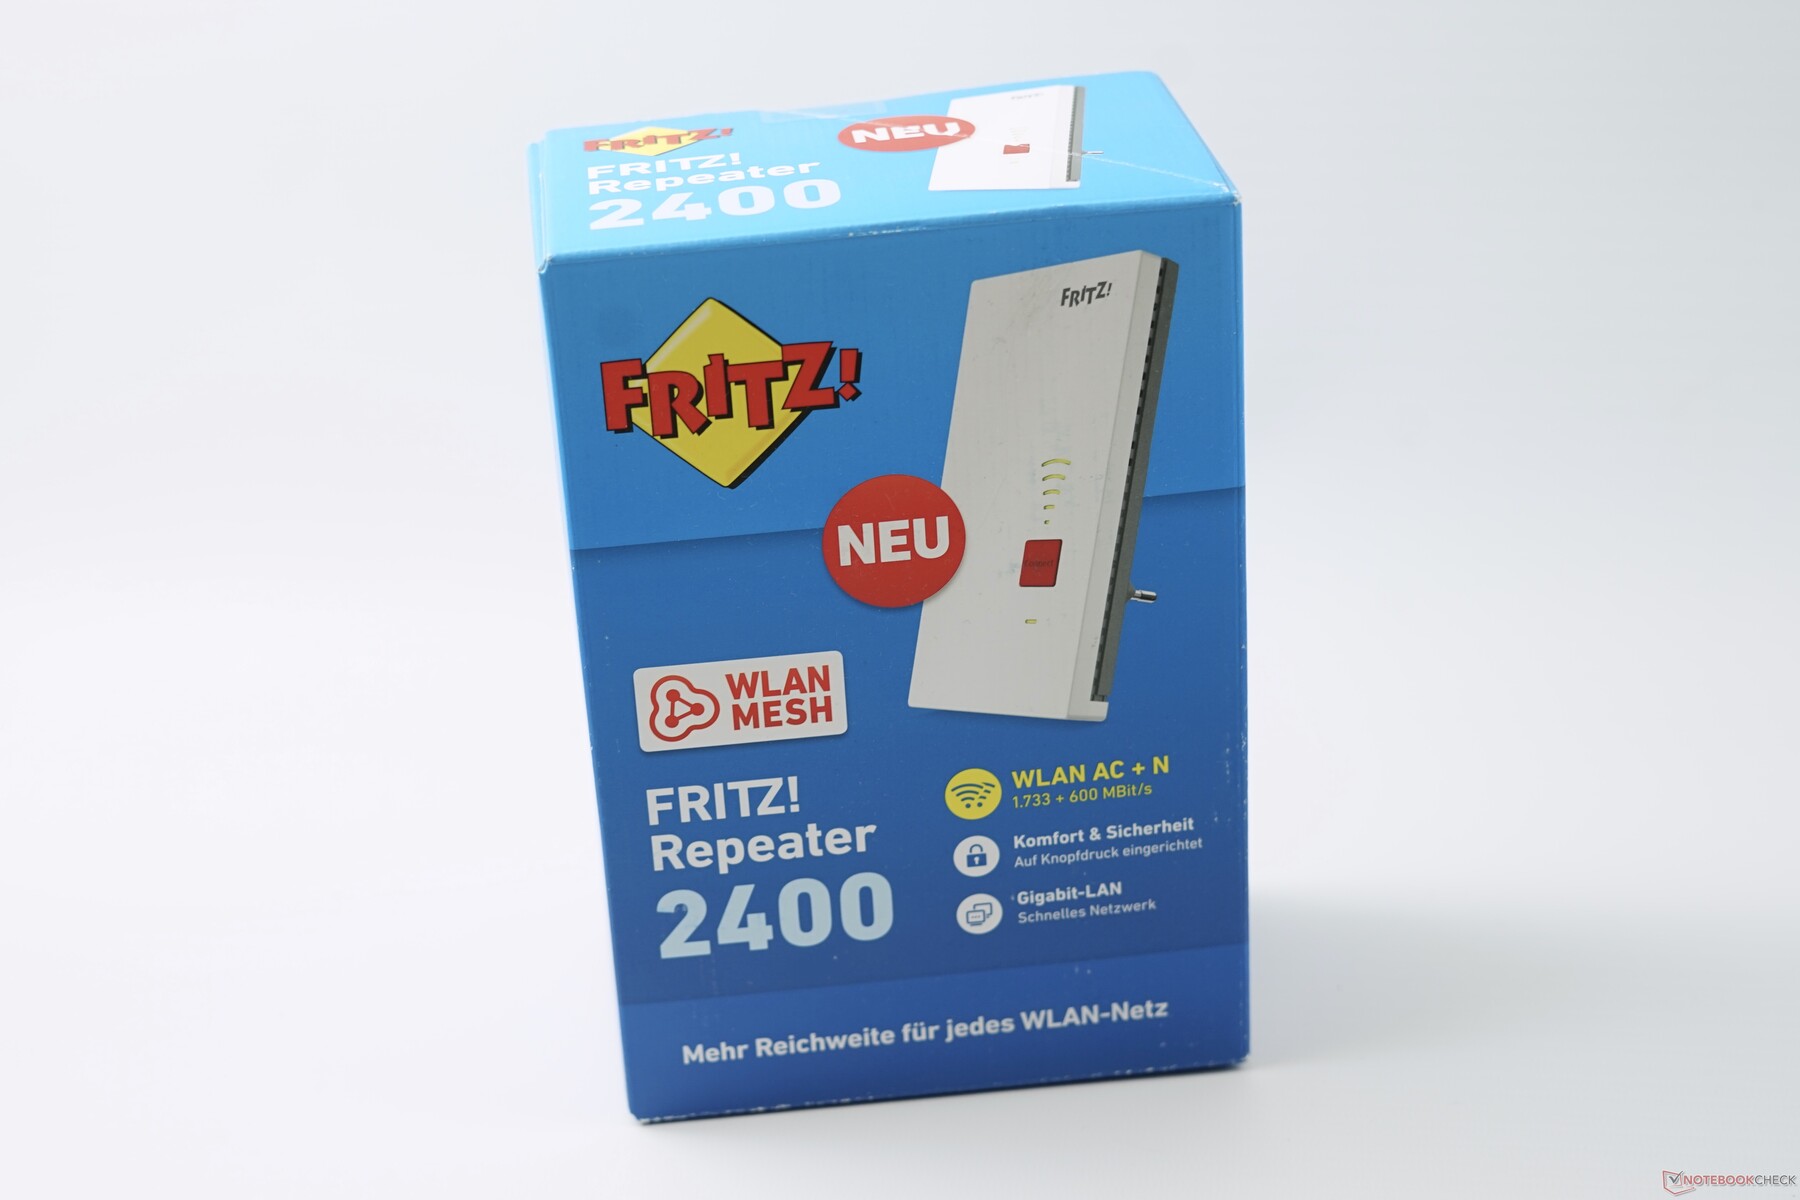 AVM Fritz! WLAN Repeater 600, NotebookCheck.net 1200, 1750E, - Review and Reviews 3000 2000